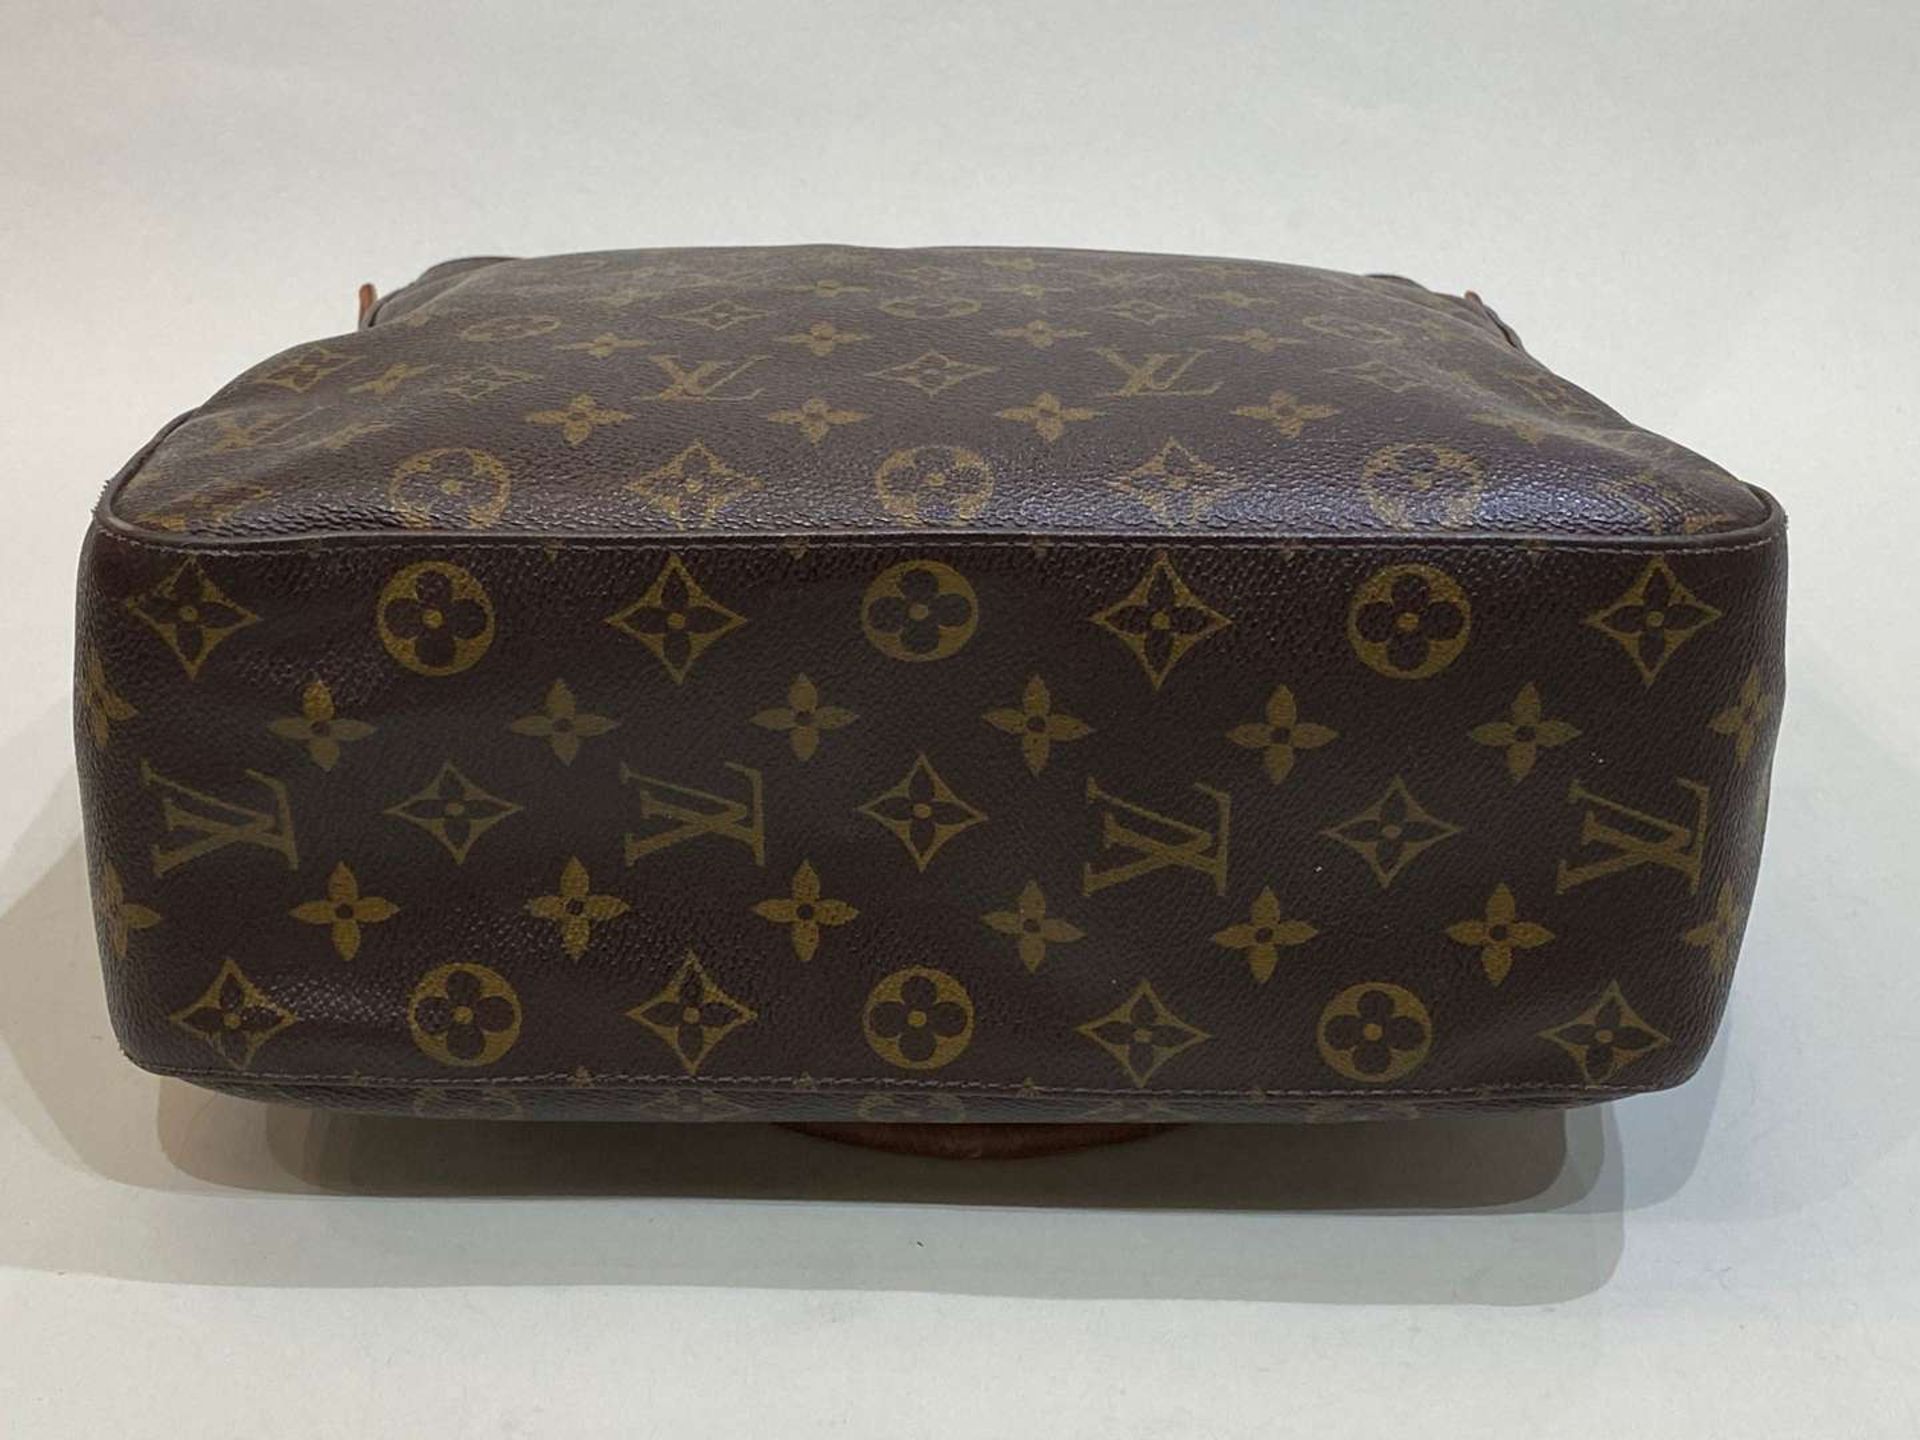 LOUIS VUITTON, Looping, tan stitched leather and monogrammed shoulder bag - Image 7 of 7